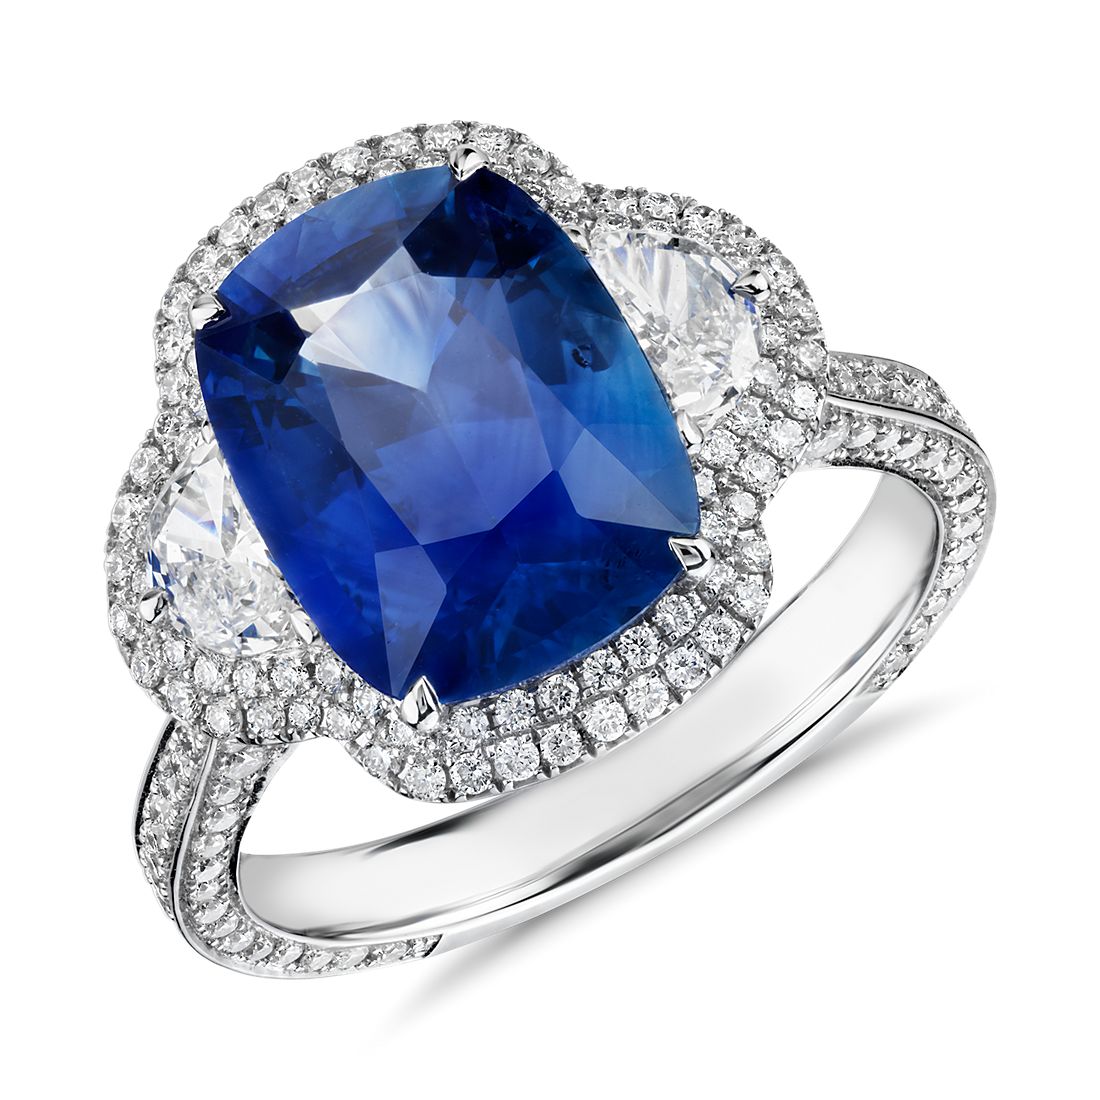 CushionCut Sapphire and Diamond Crown Halo Ring in 18k